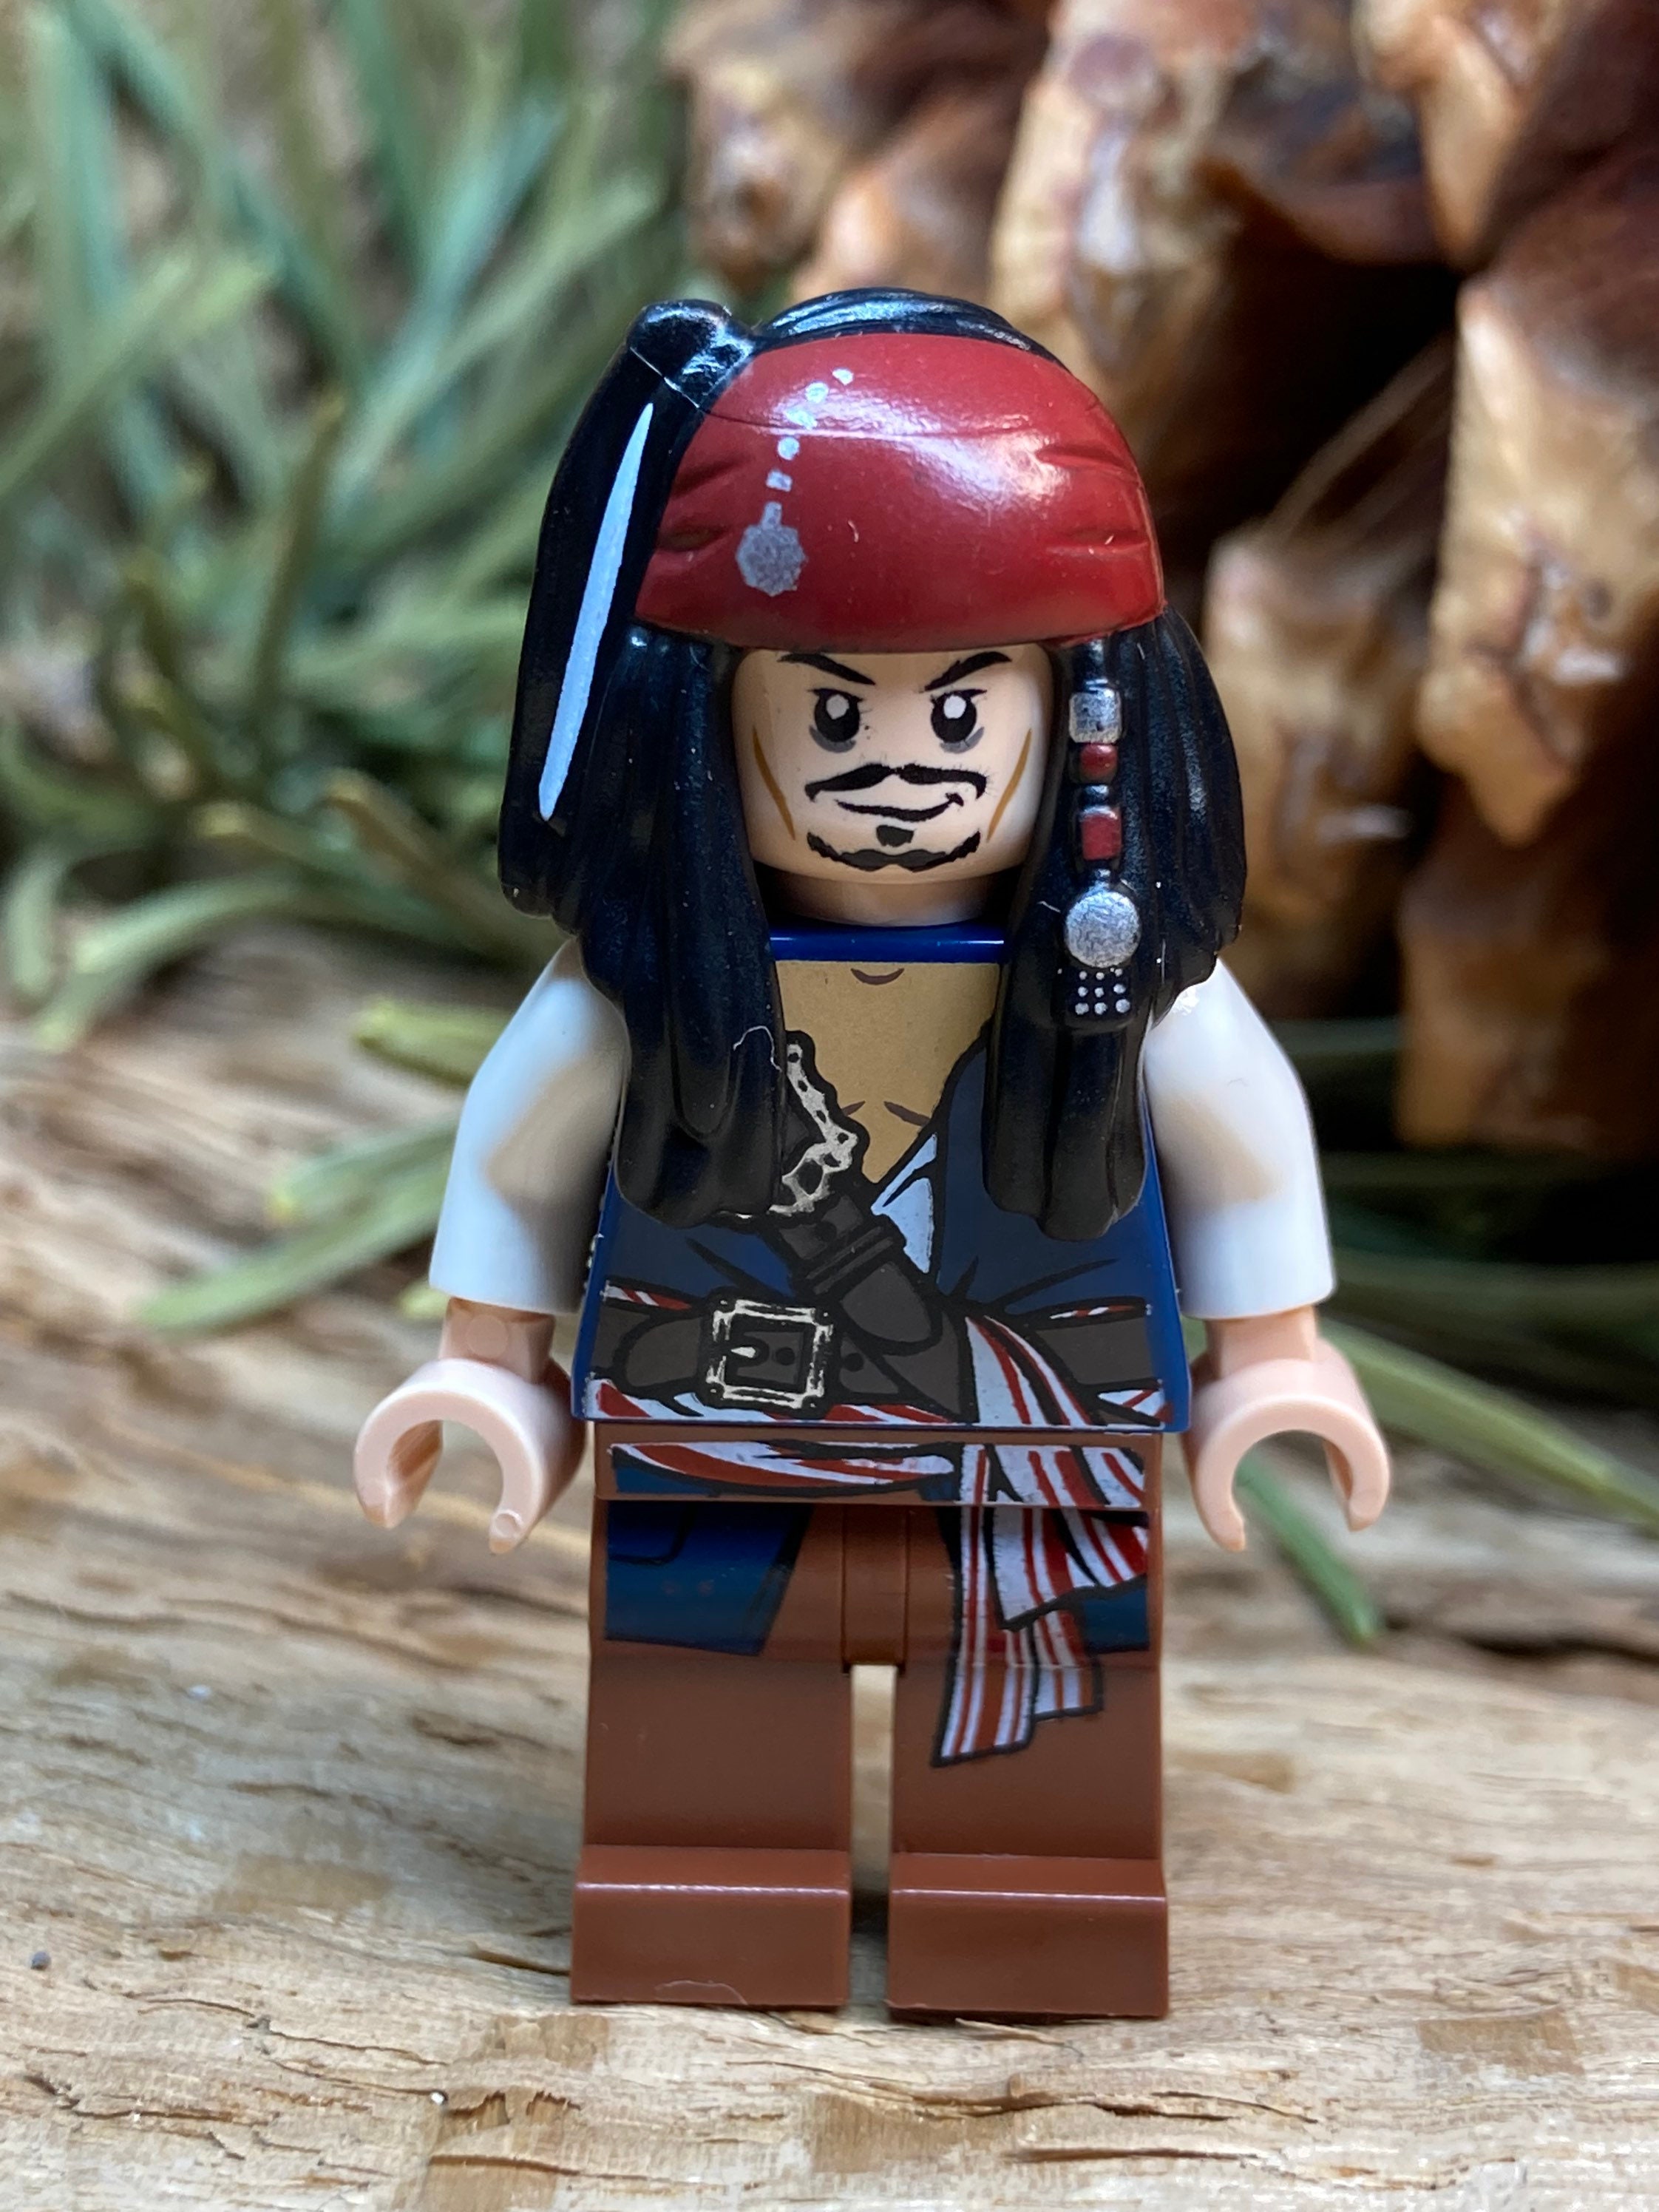 fast-shipping-and-low-prices-saver-prices-lego-captain-jack-sparrow